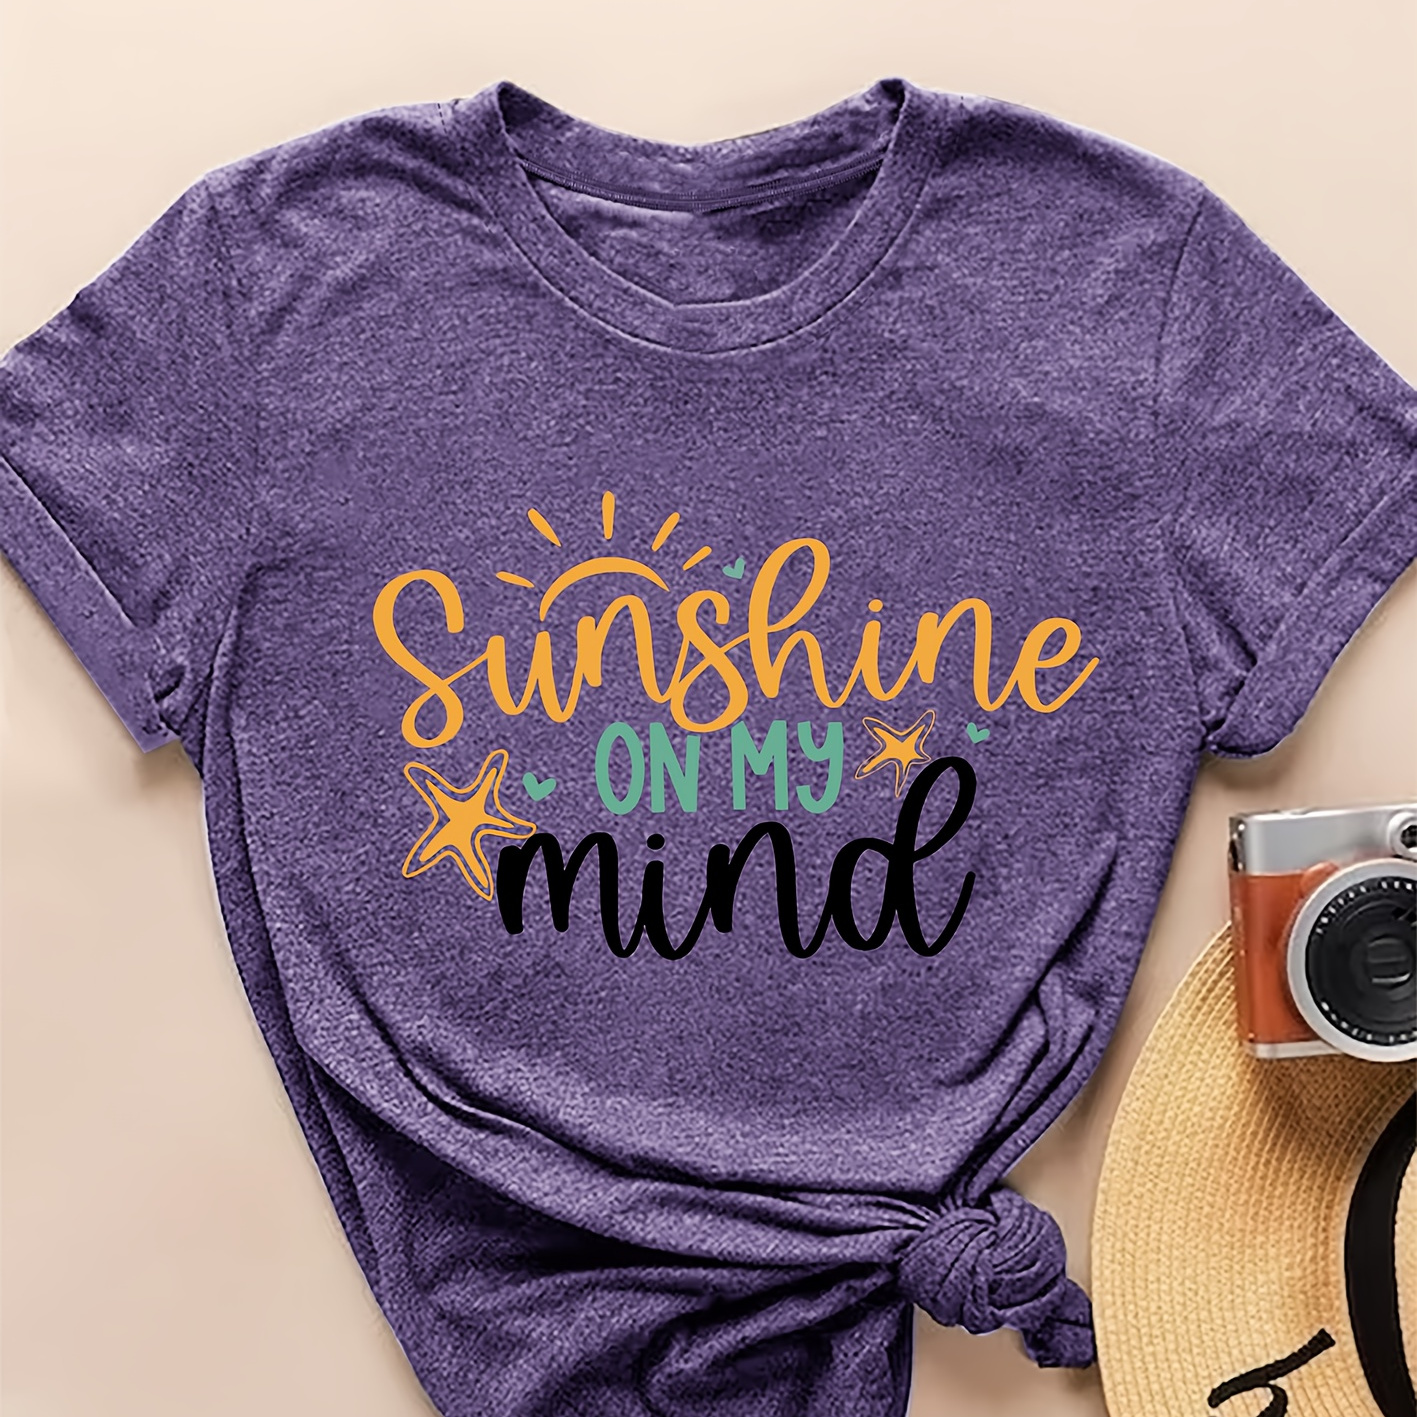 

Women's Short Sleeve T-shirt, "sunshine On My Mind" Letter Print, Vintage Style, Round Neck, Casual Summer Top, Fashionable Seasonal Tee For Ladies